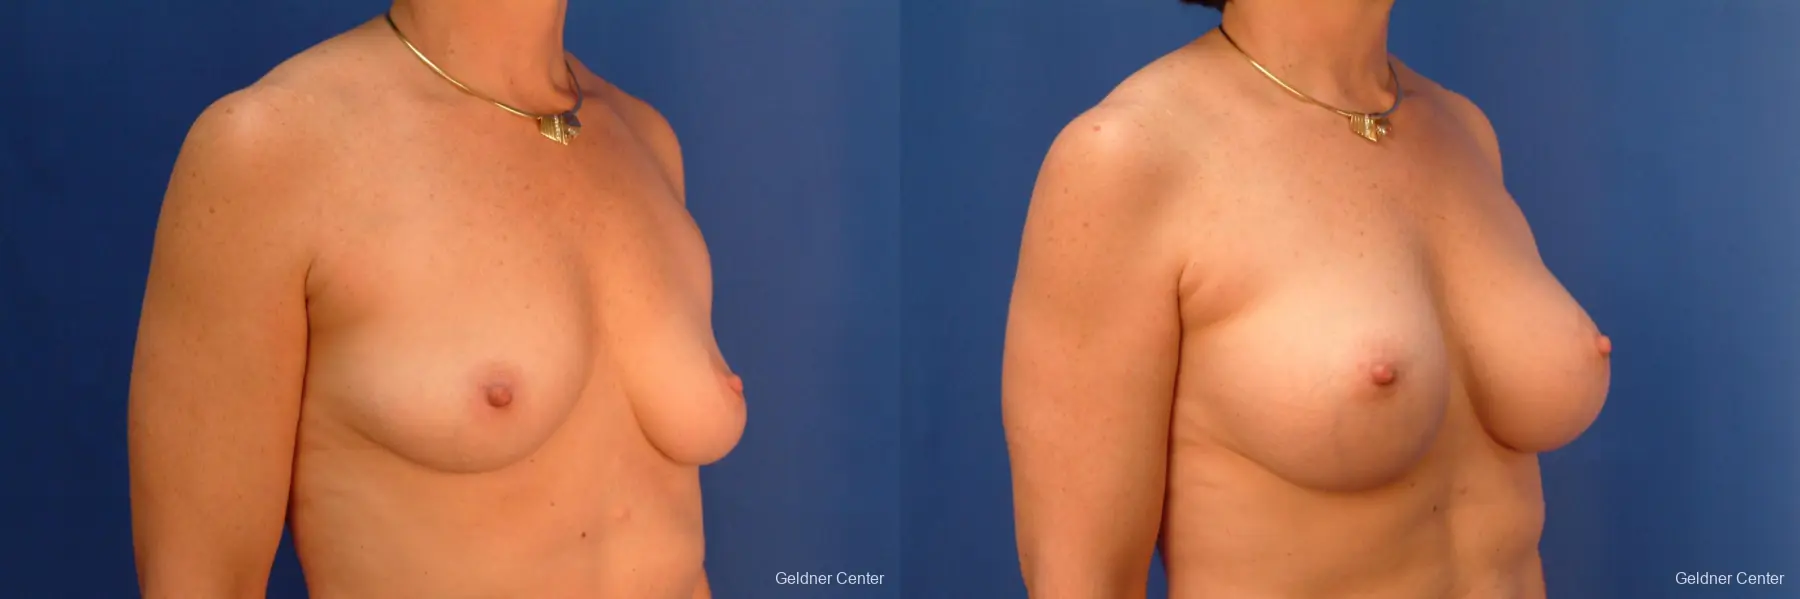 Breast Augmentation Hinsdale, Chicago 2541 - Before and After 3